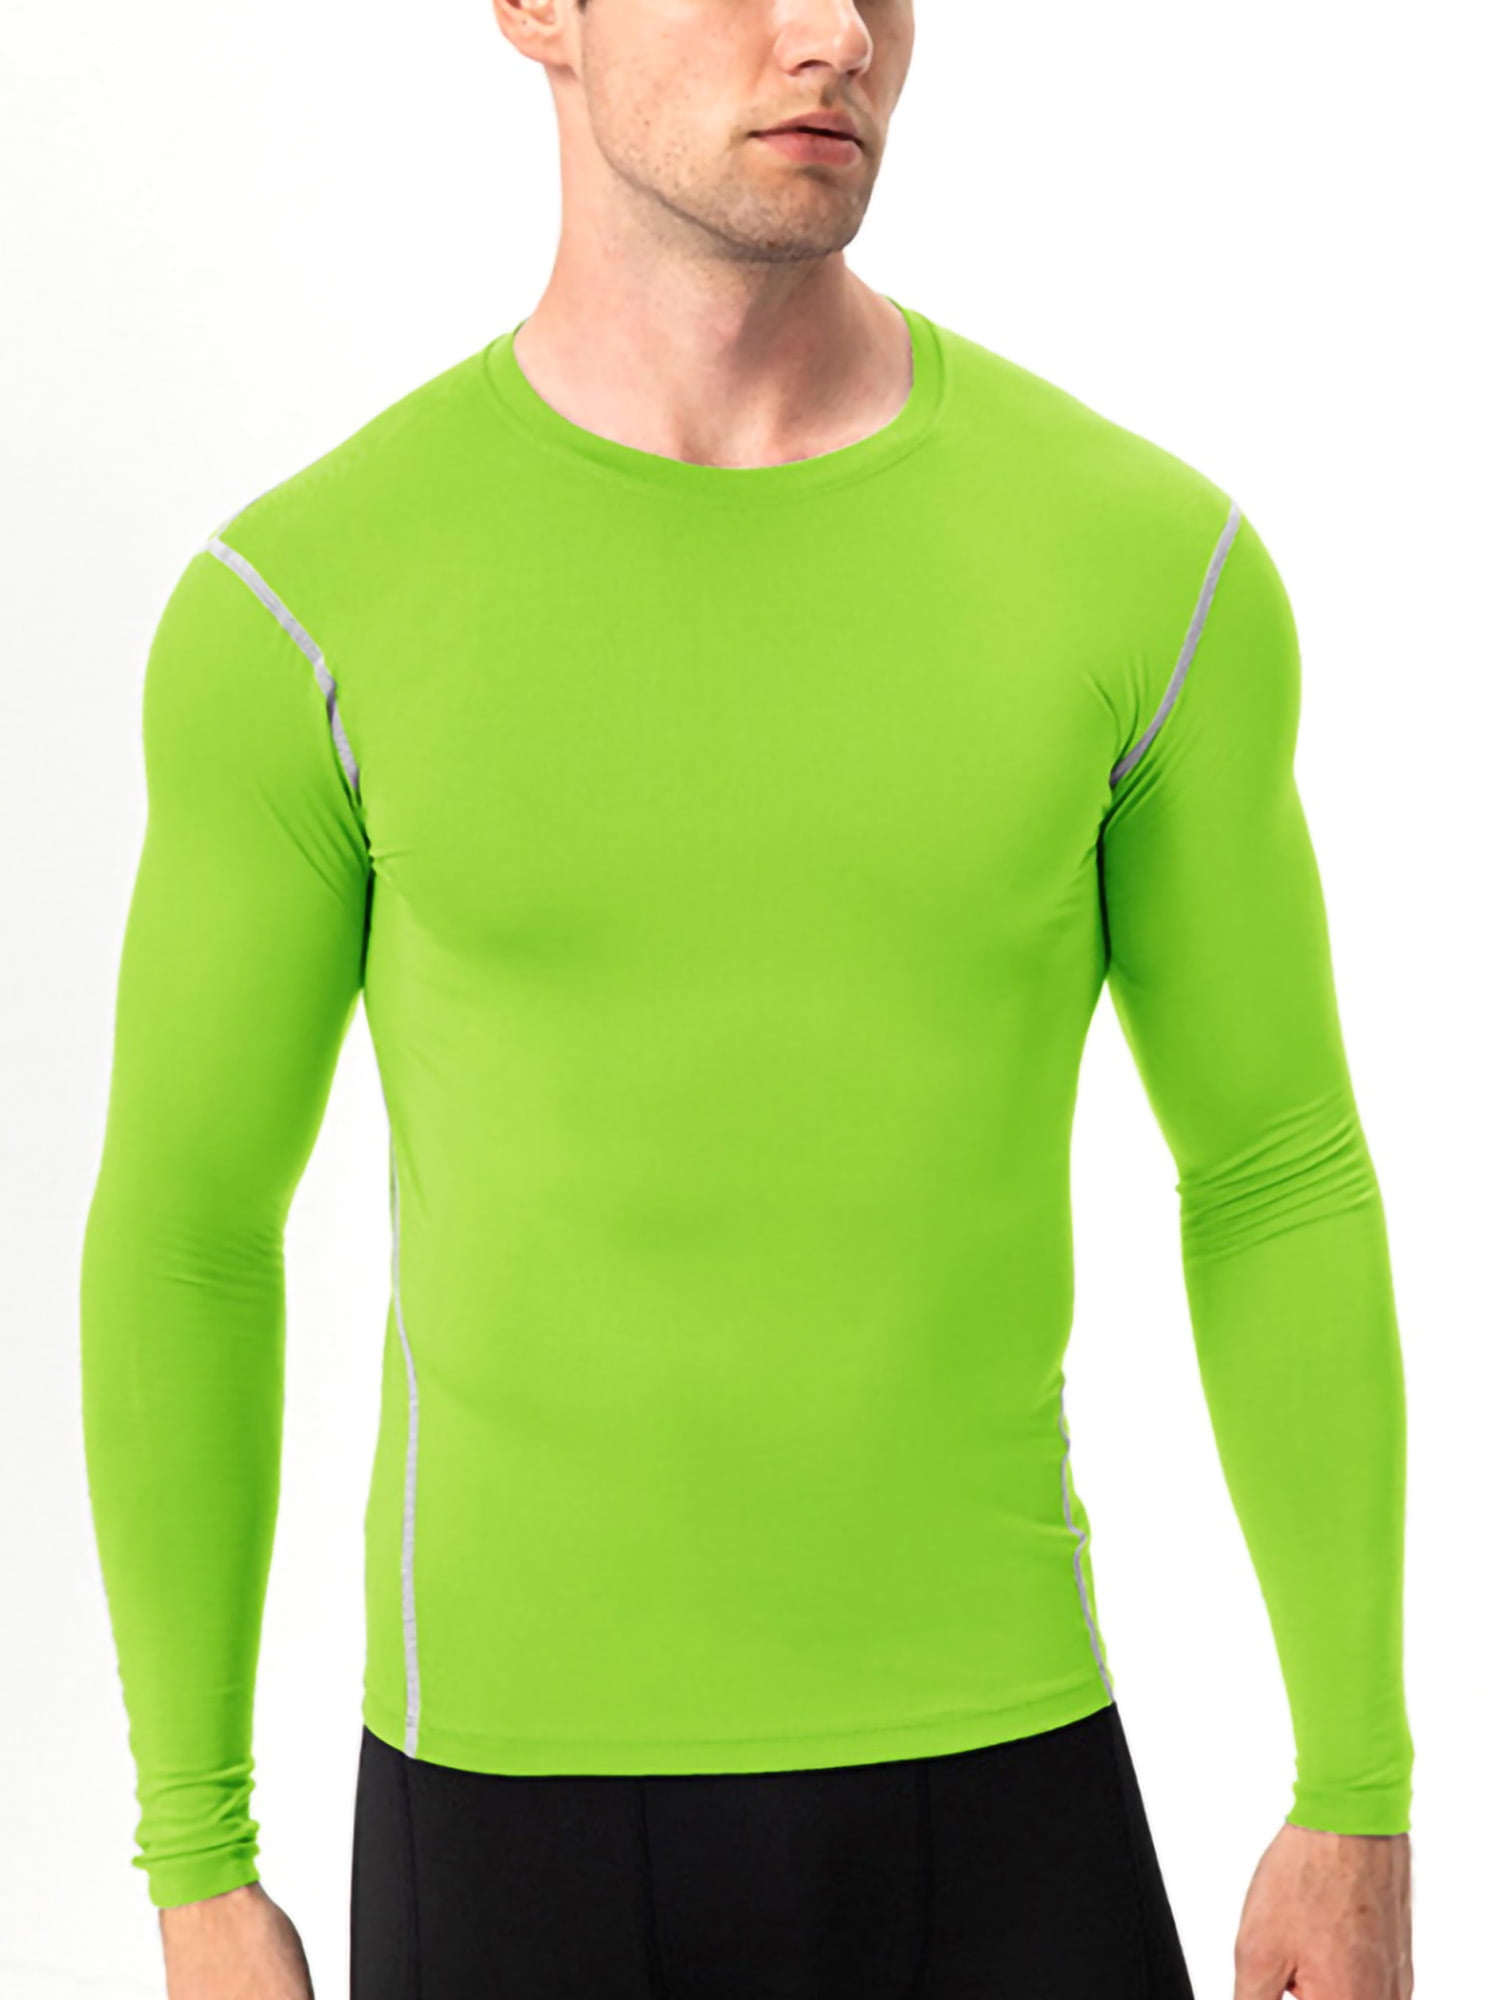 Vejrtrækning bunke Bloodstained Grianlook Men Sport T Shirt Baselayer Compression Shirts Cool Dry Muscle  Tops Mens Breathable T-shirt Casual Long Sleeve Tee Light Green 2XL -  Walmart.com